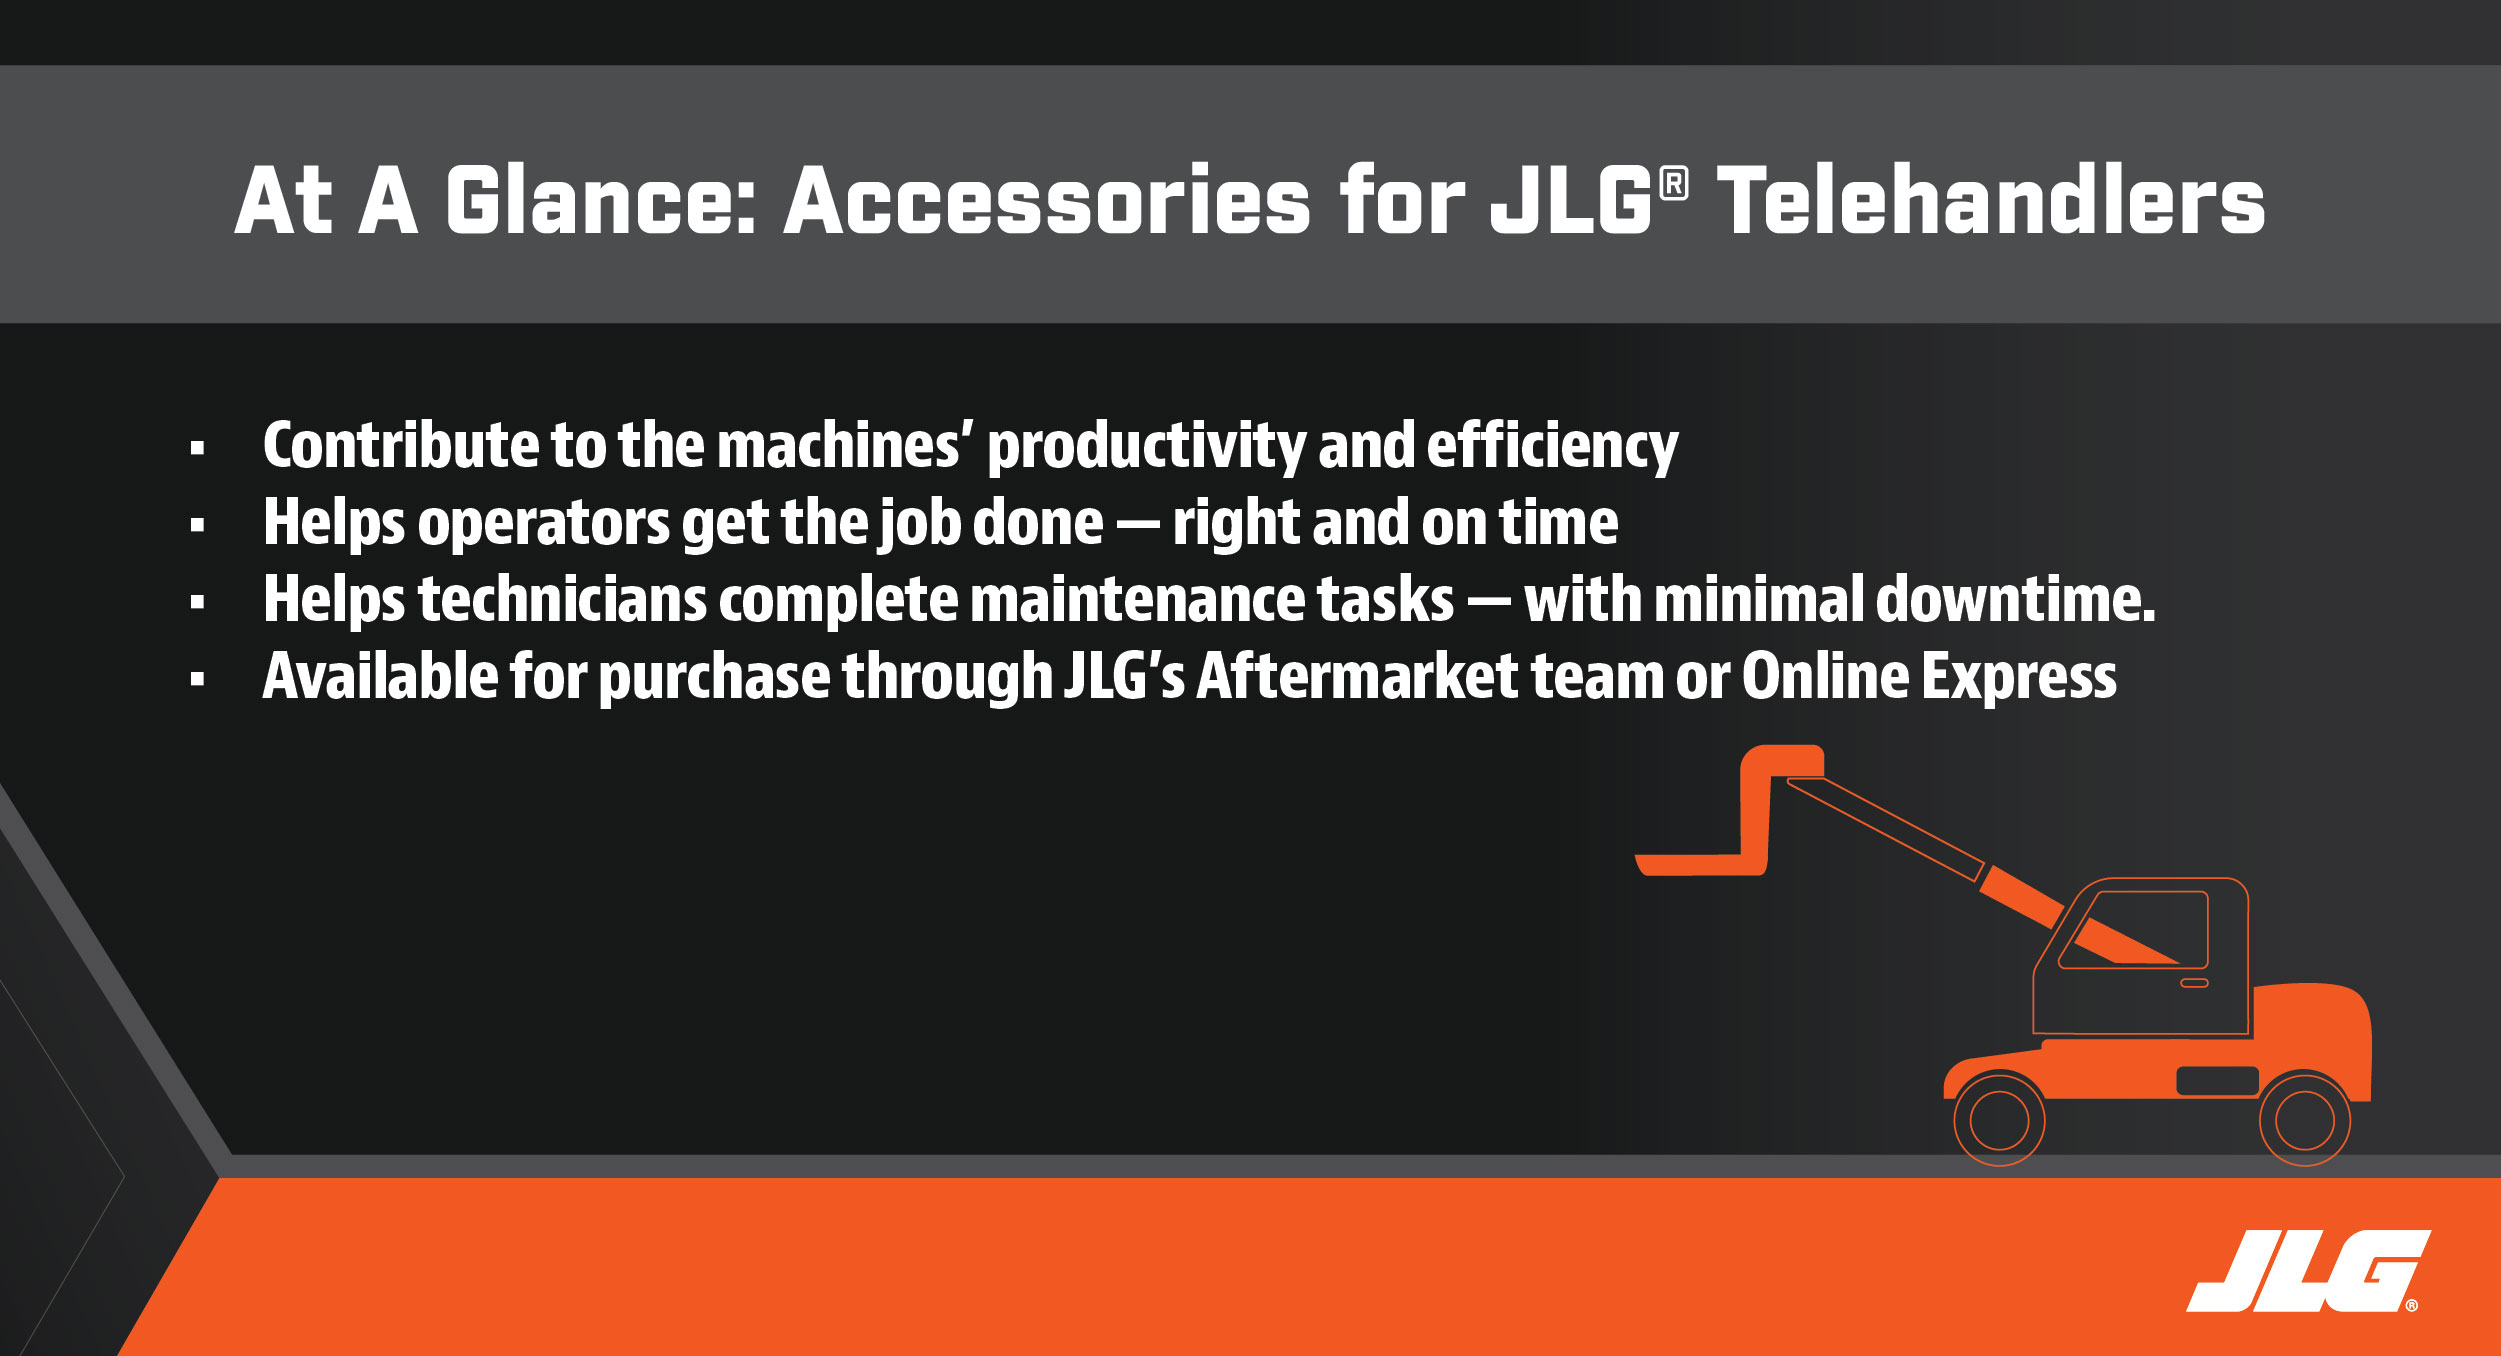 Latest Accessories for JLG Telehandlers at a Glance